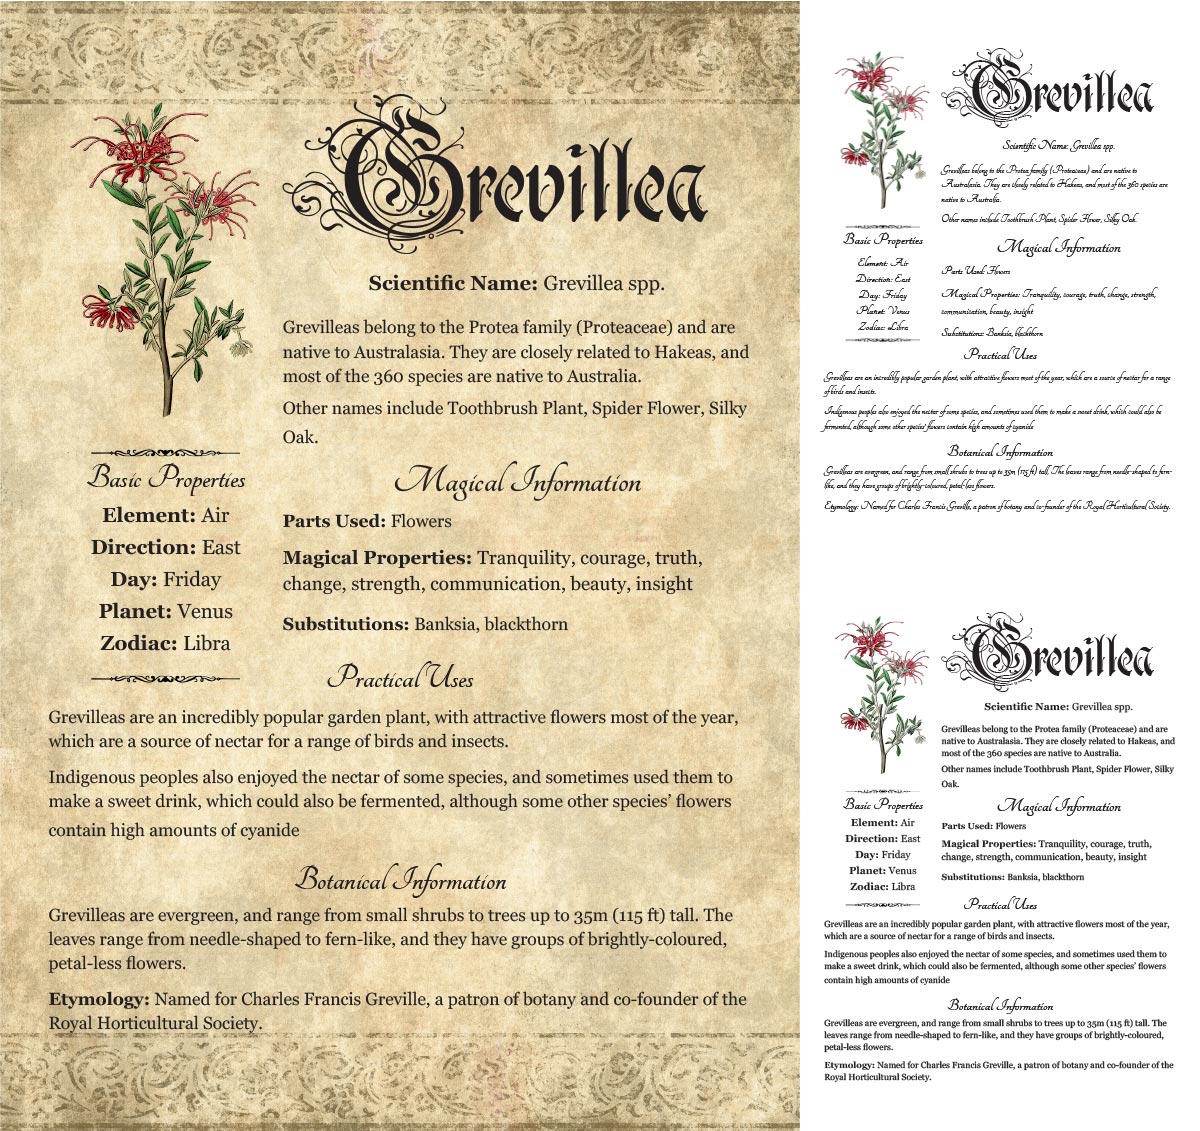 Collage of 3 versions of the Grevillea grimoire page: with a readable/serif vs script font + with/without background